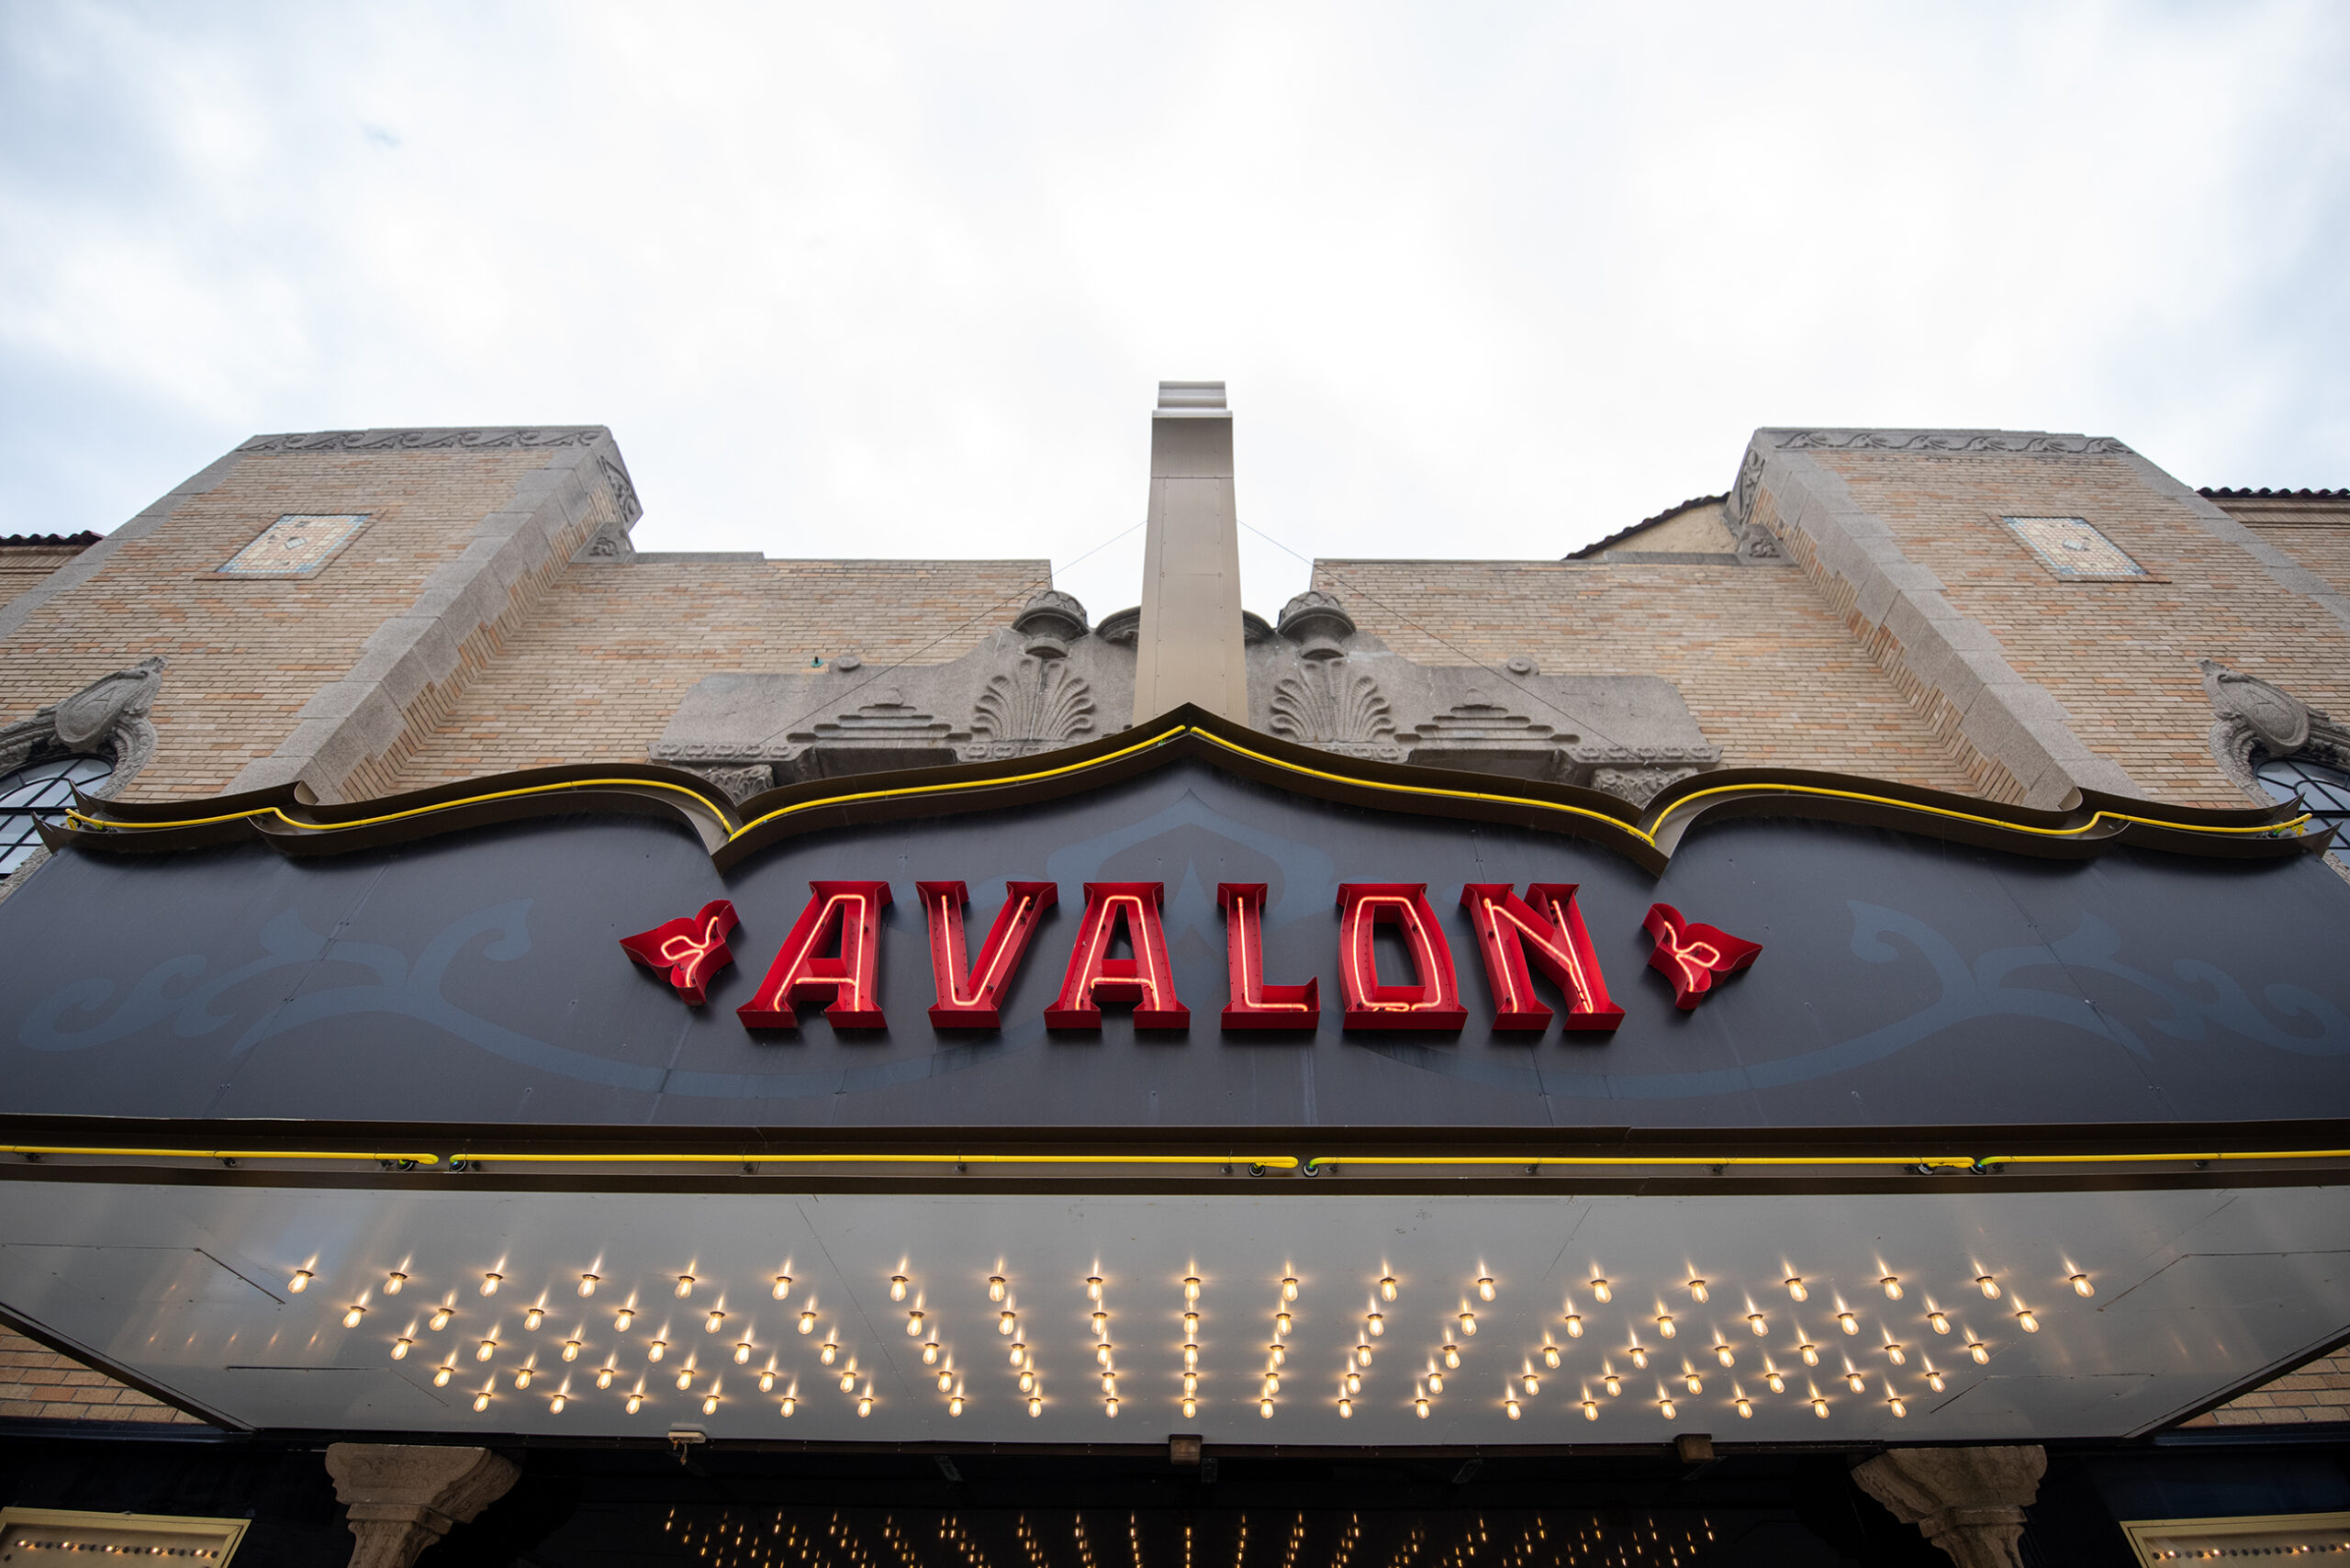 A red sign says "Avalon" outside a building.